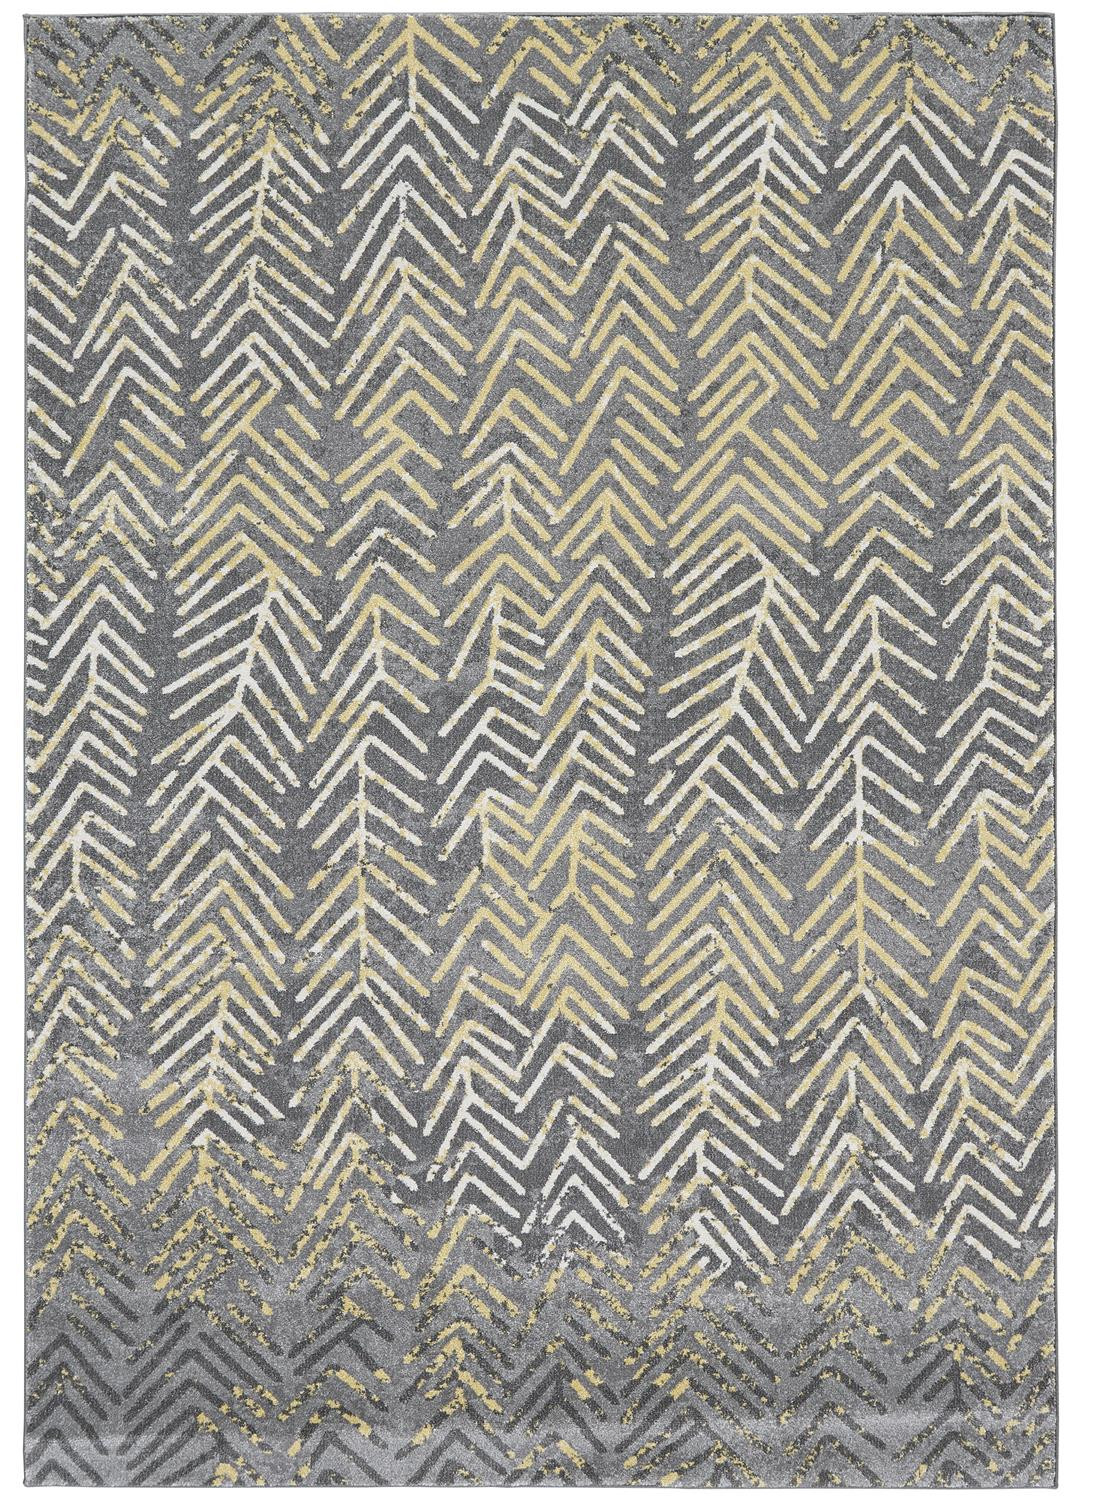 10' X 13' Gray Yellow And White Abstract Stain Resistant Area Rug-511169-1